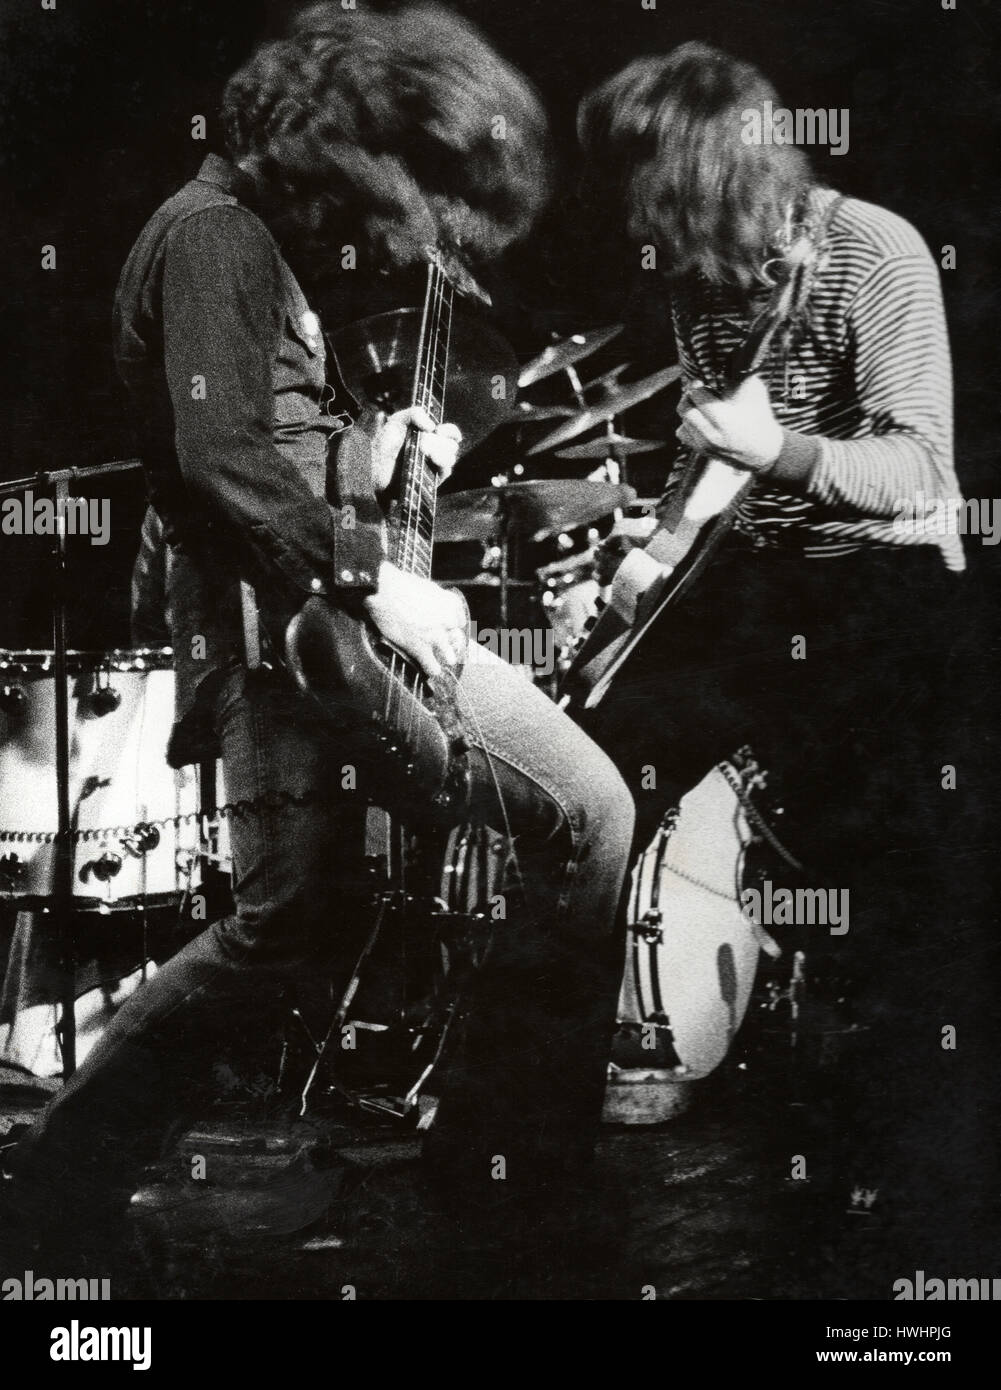 Rory Gallagher at the Roundhouse London Stock Photo